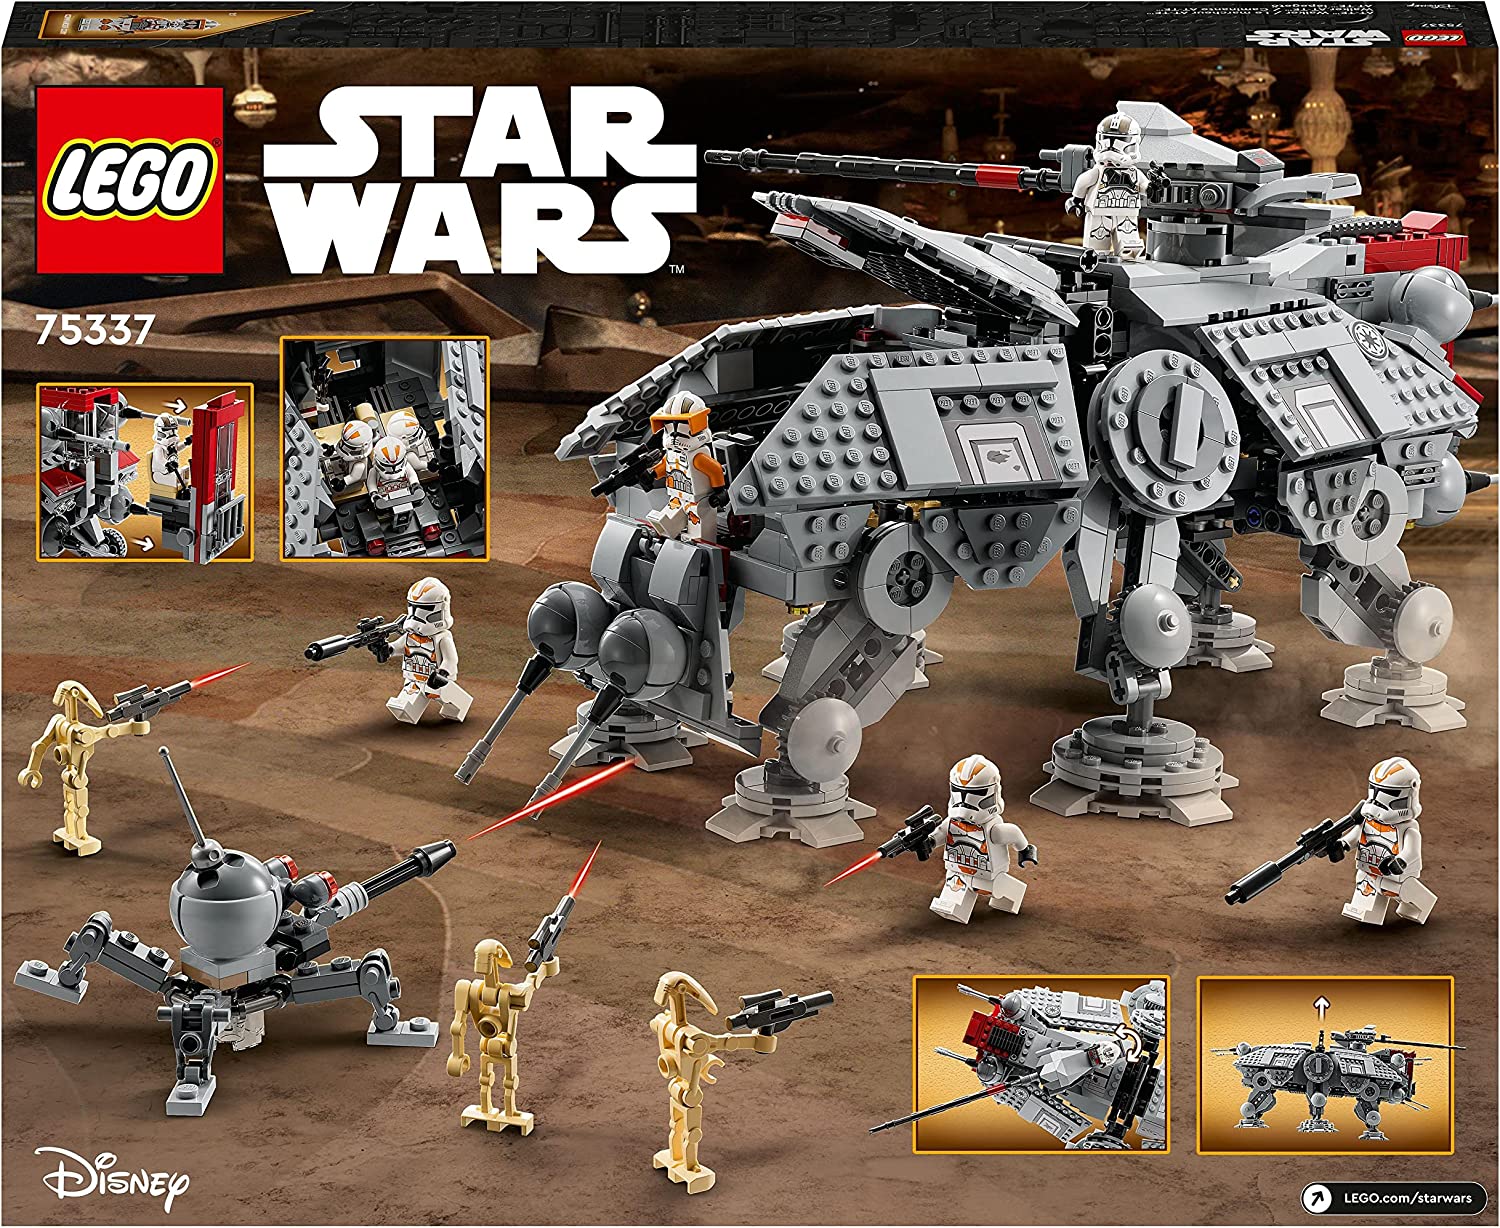 LEGO 75337 Star Wars AT-TE Walker Moving Toy Model Set with Mini Figures Including 3 Clone Soldiers, Battle Droid and Dwarf Spinning Droid